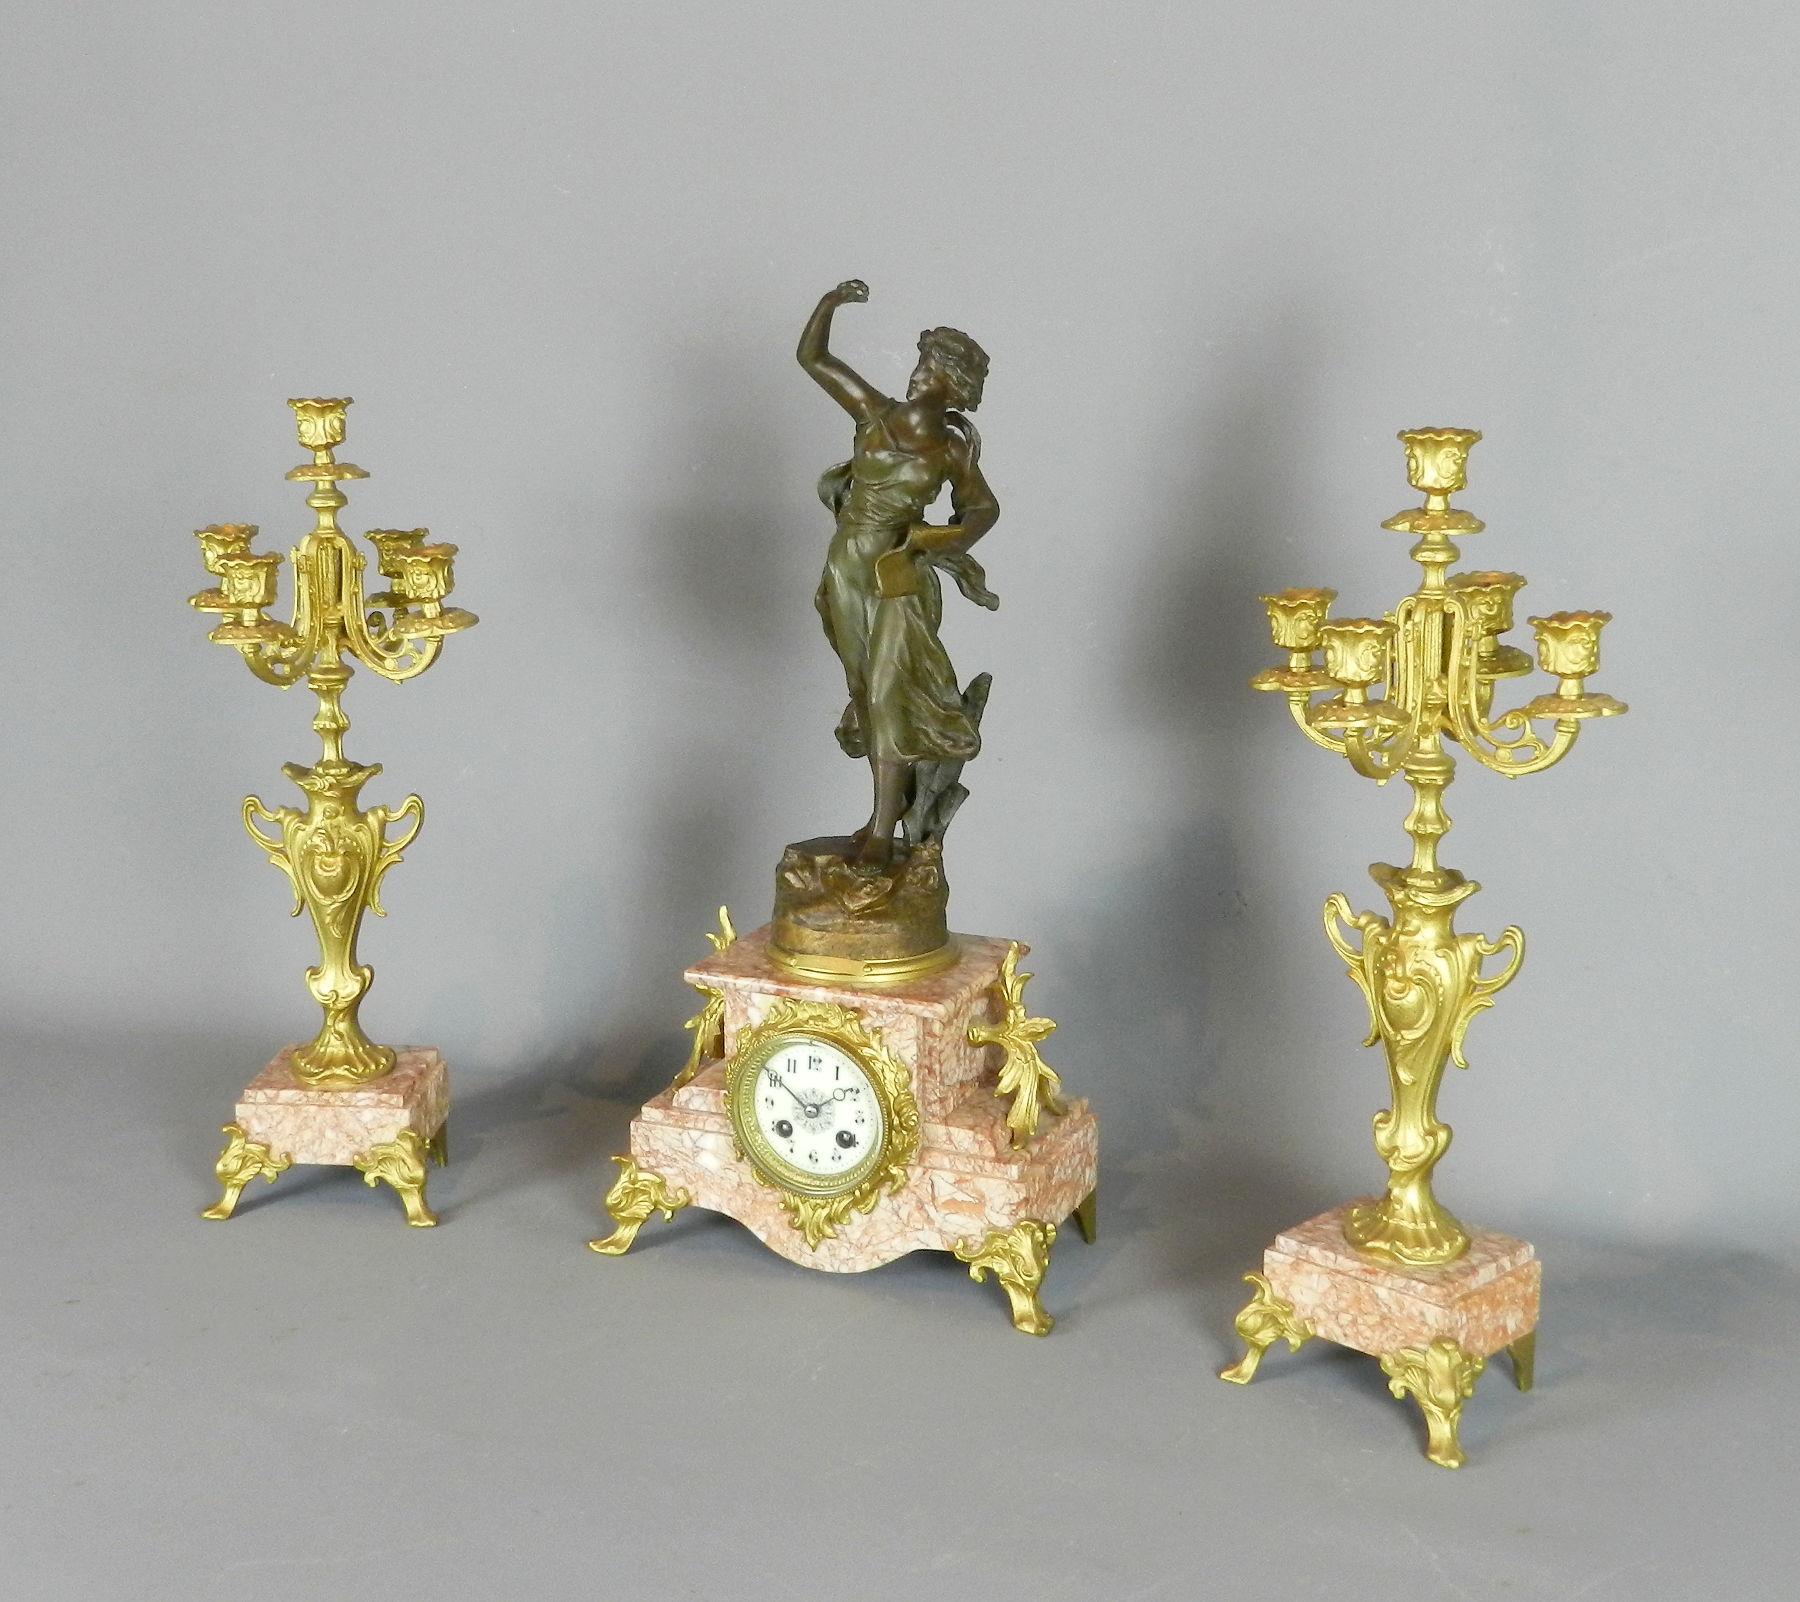 An antique French bronzed spelter clock set with its pair of matching gilt candelabra / garniture. 

The finely cast figurine of a lady holding a manuscript is entitled Poésie and is signed by the maker Jean Charles Ruchot working in the Art